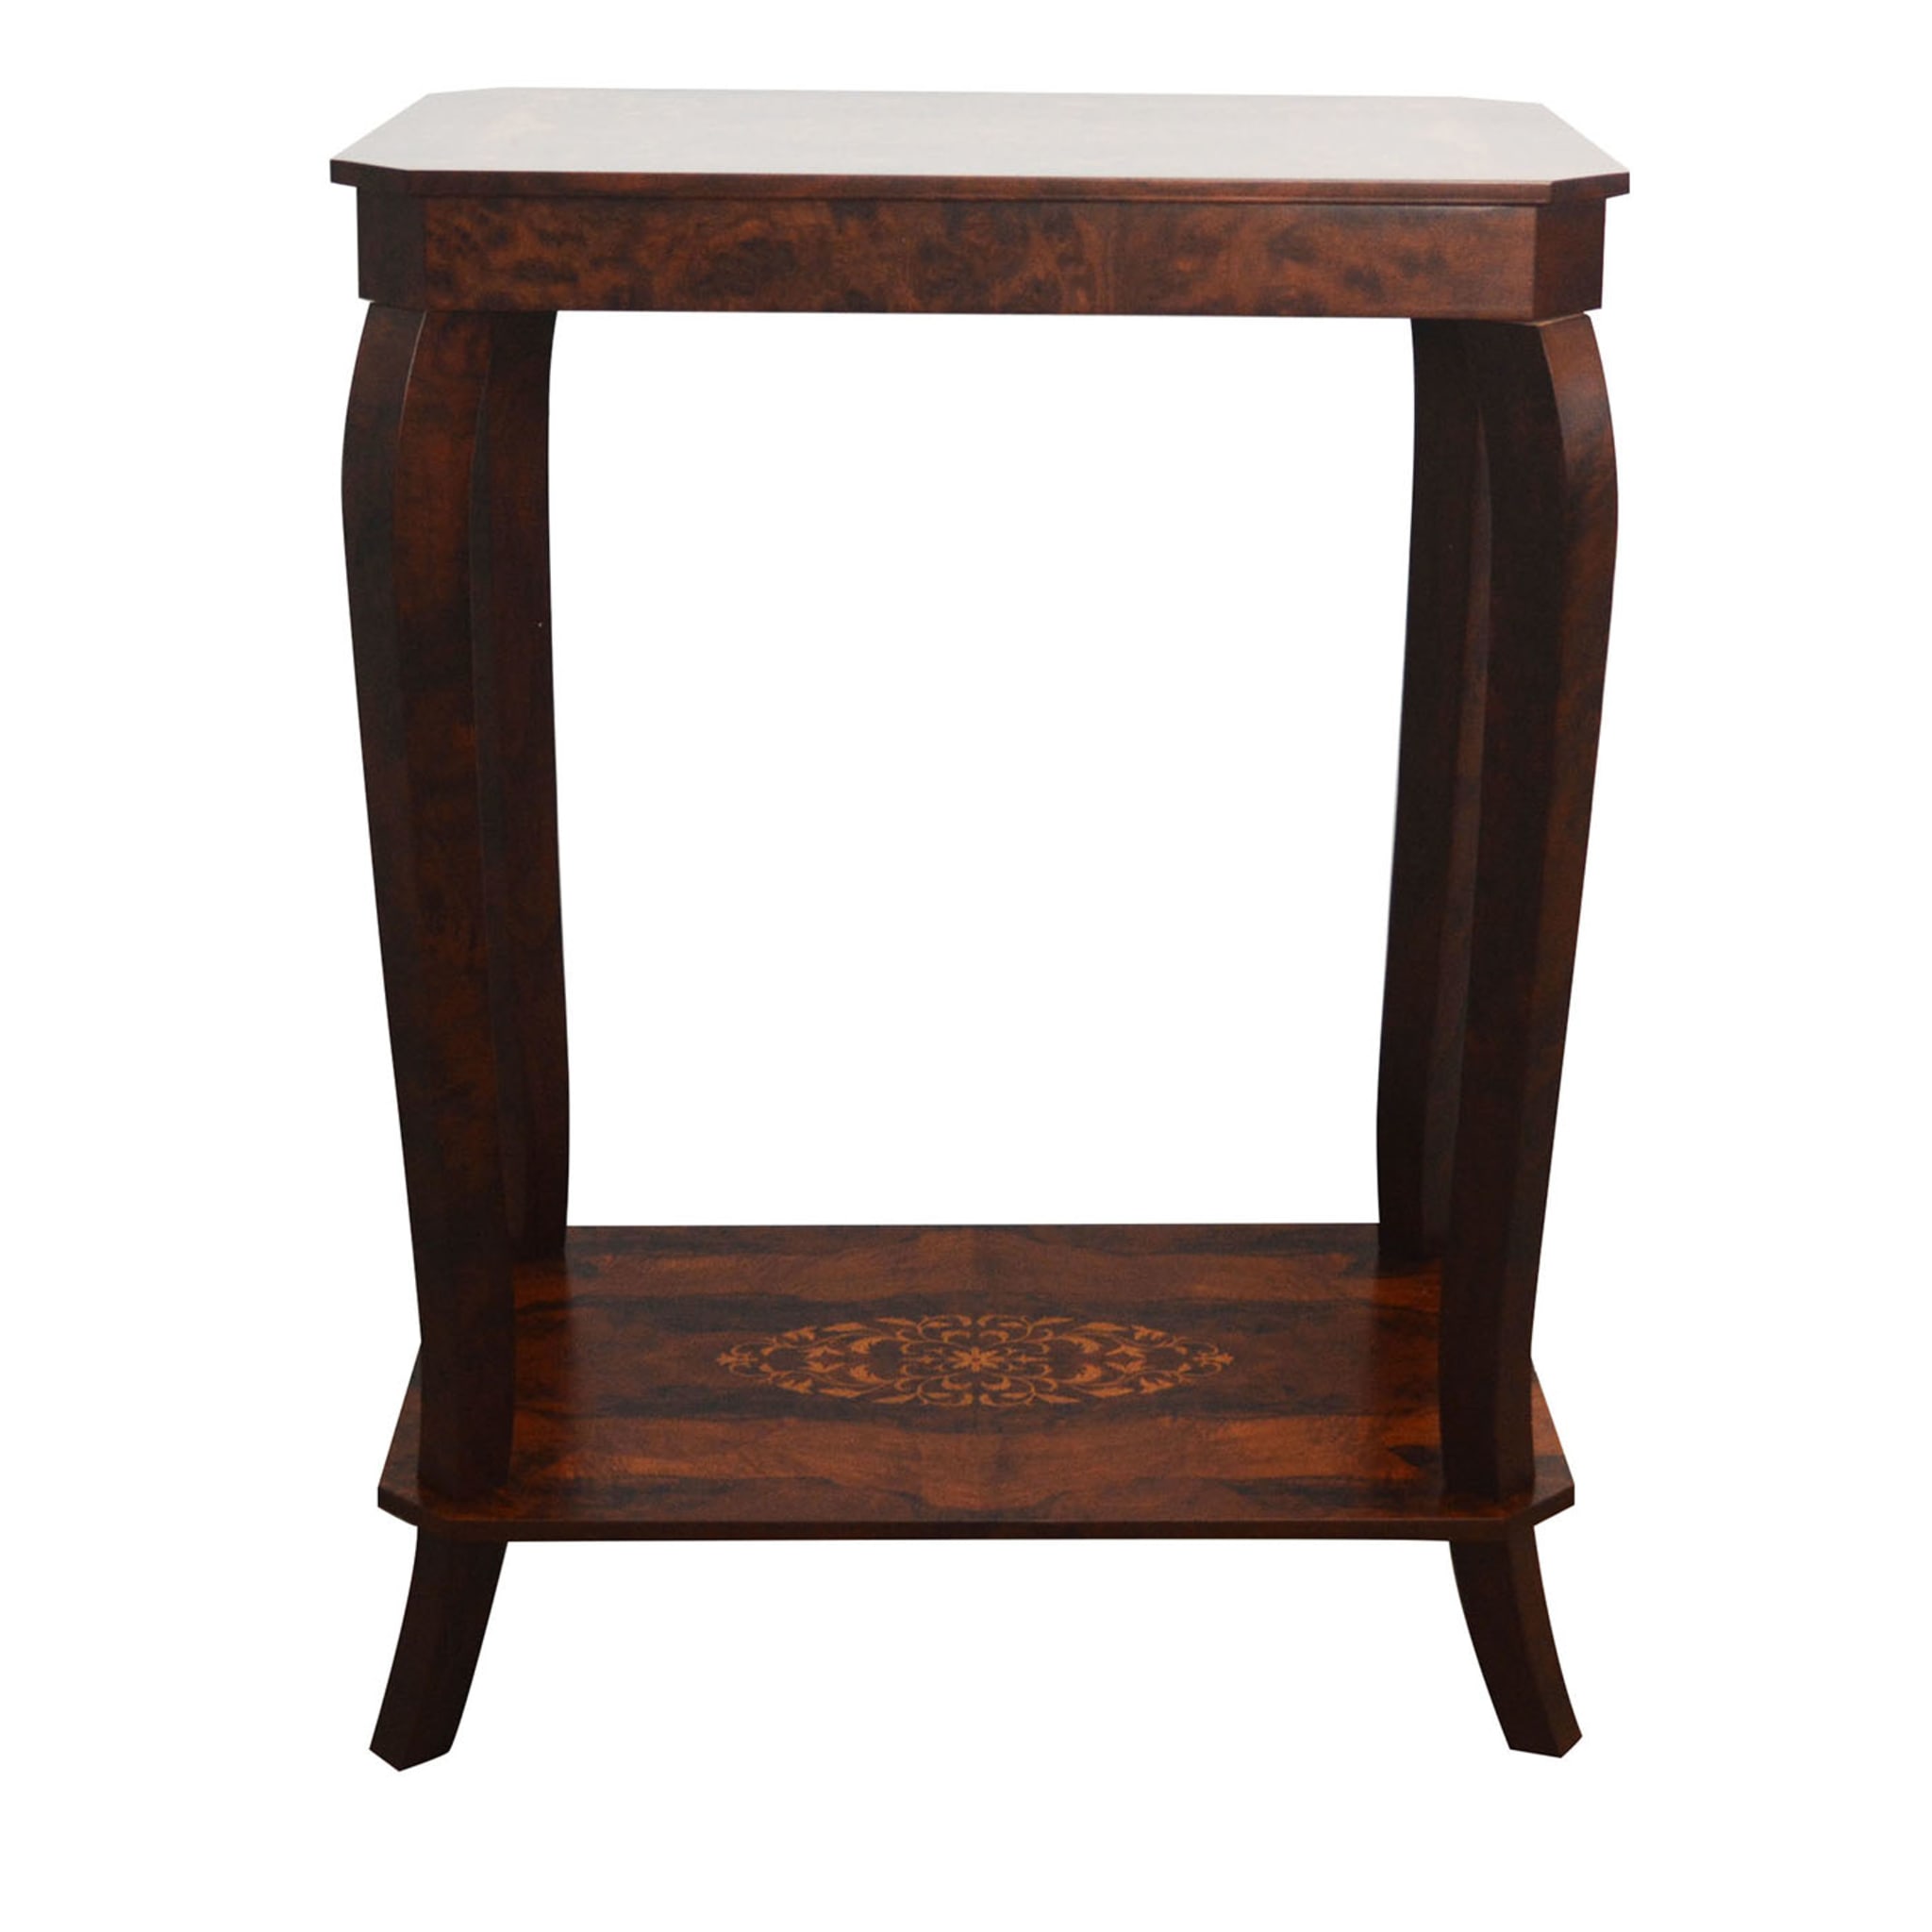 Musical Walnut Briar Side Table with Storage Unit - Main view